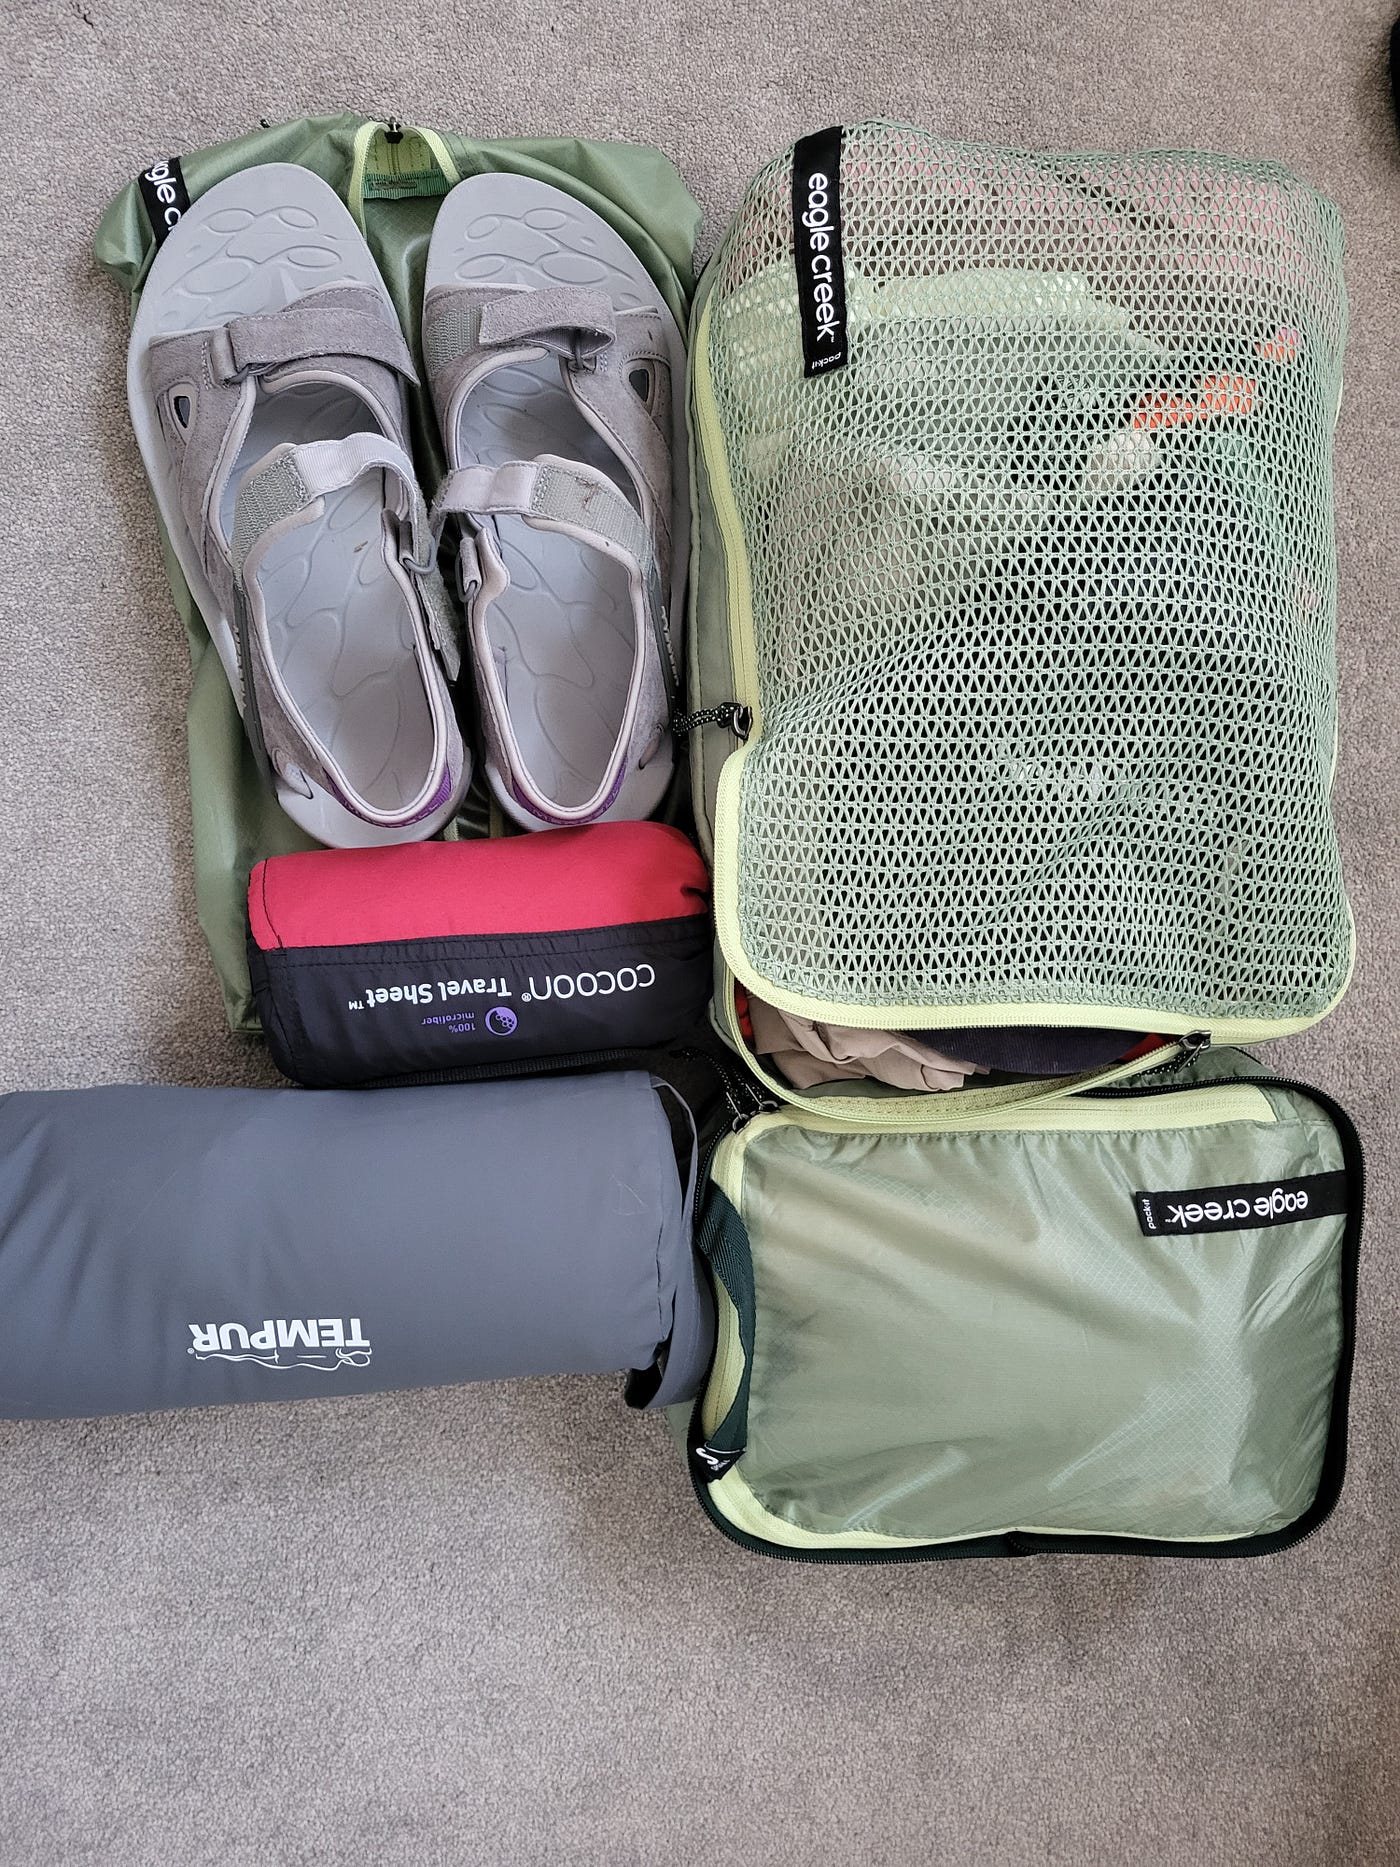 Our longterm travel medical kit: Packing for a family gap year.